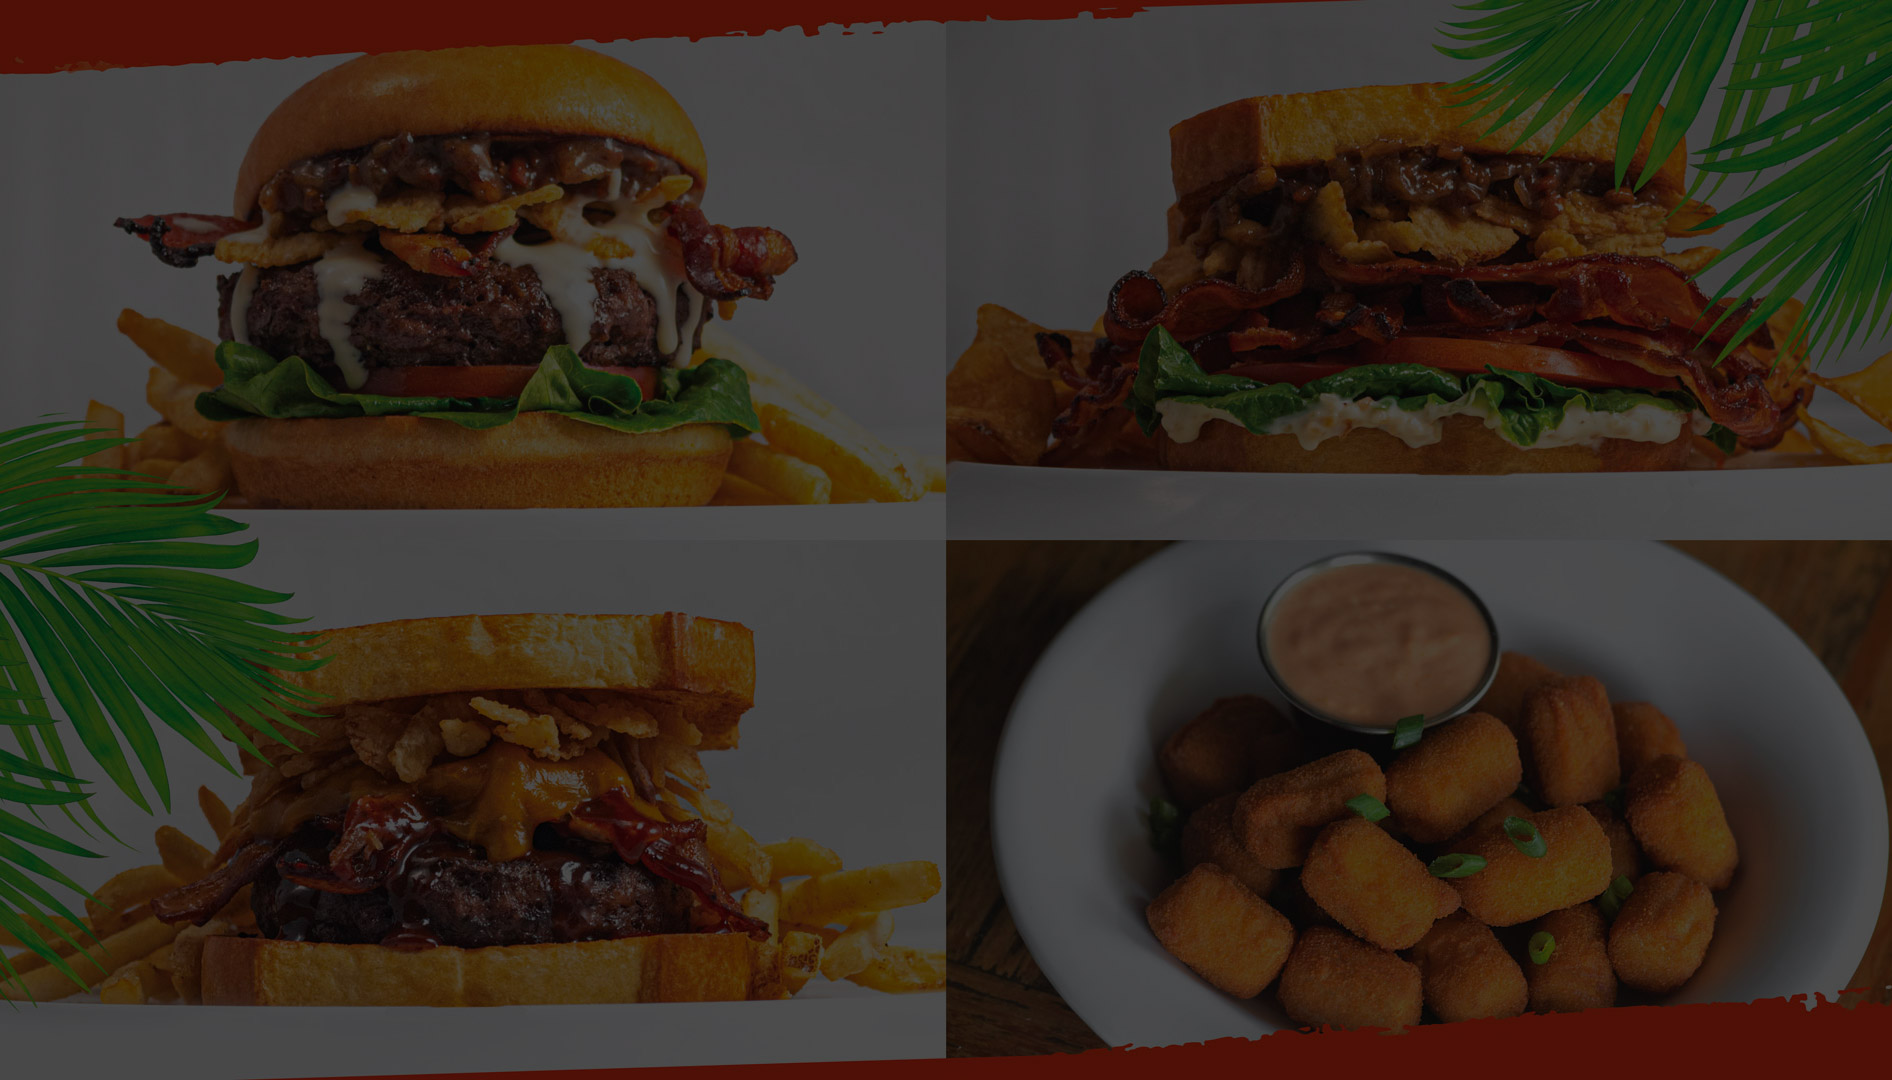 Grid of 4 imags: Pictures of burgers, sandwiches, and tater tots